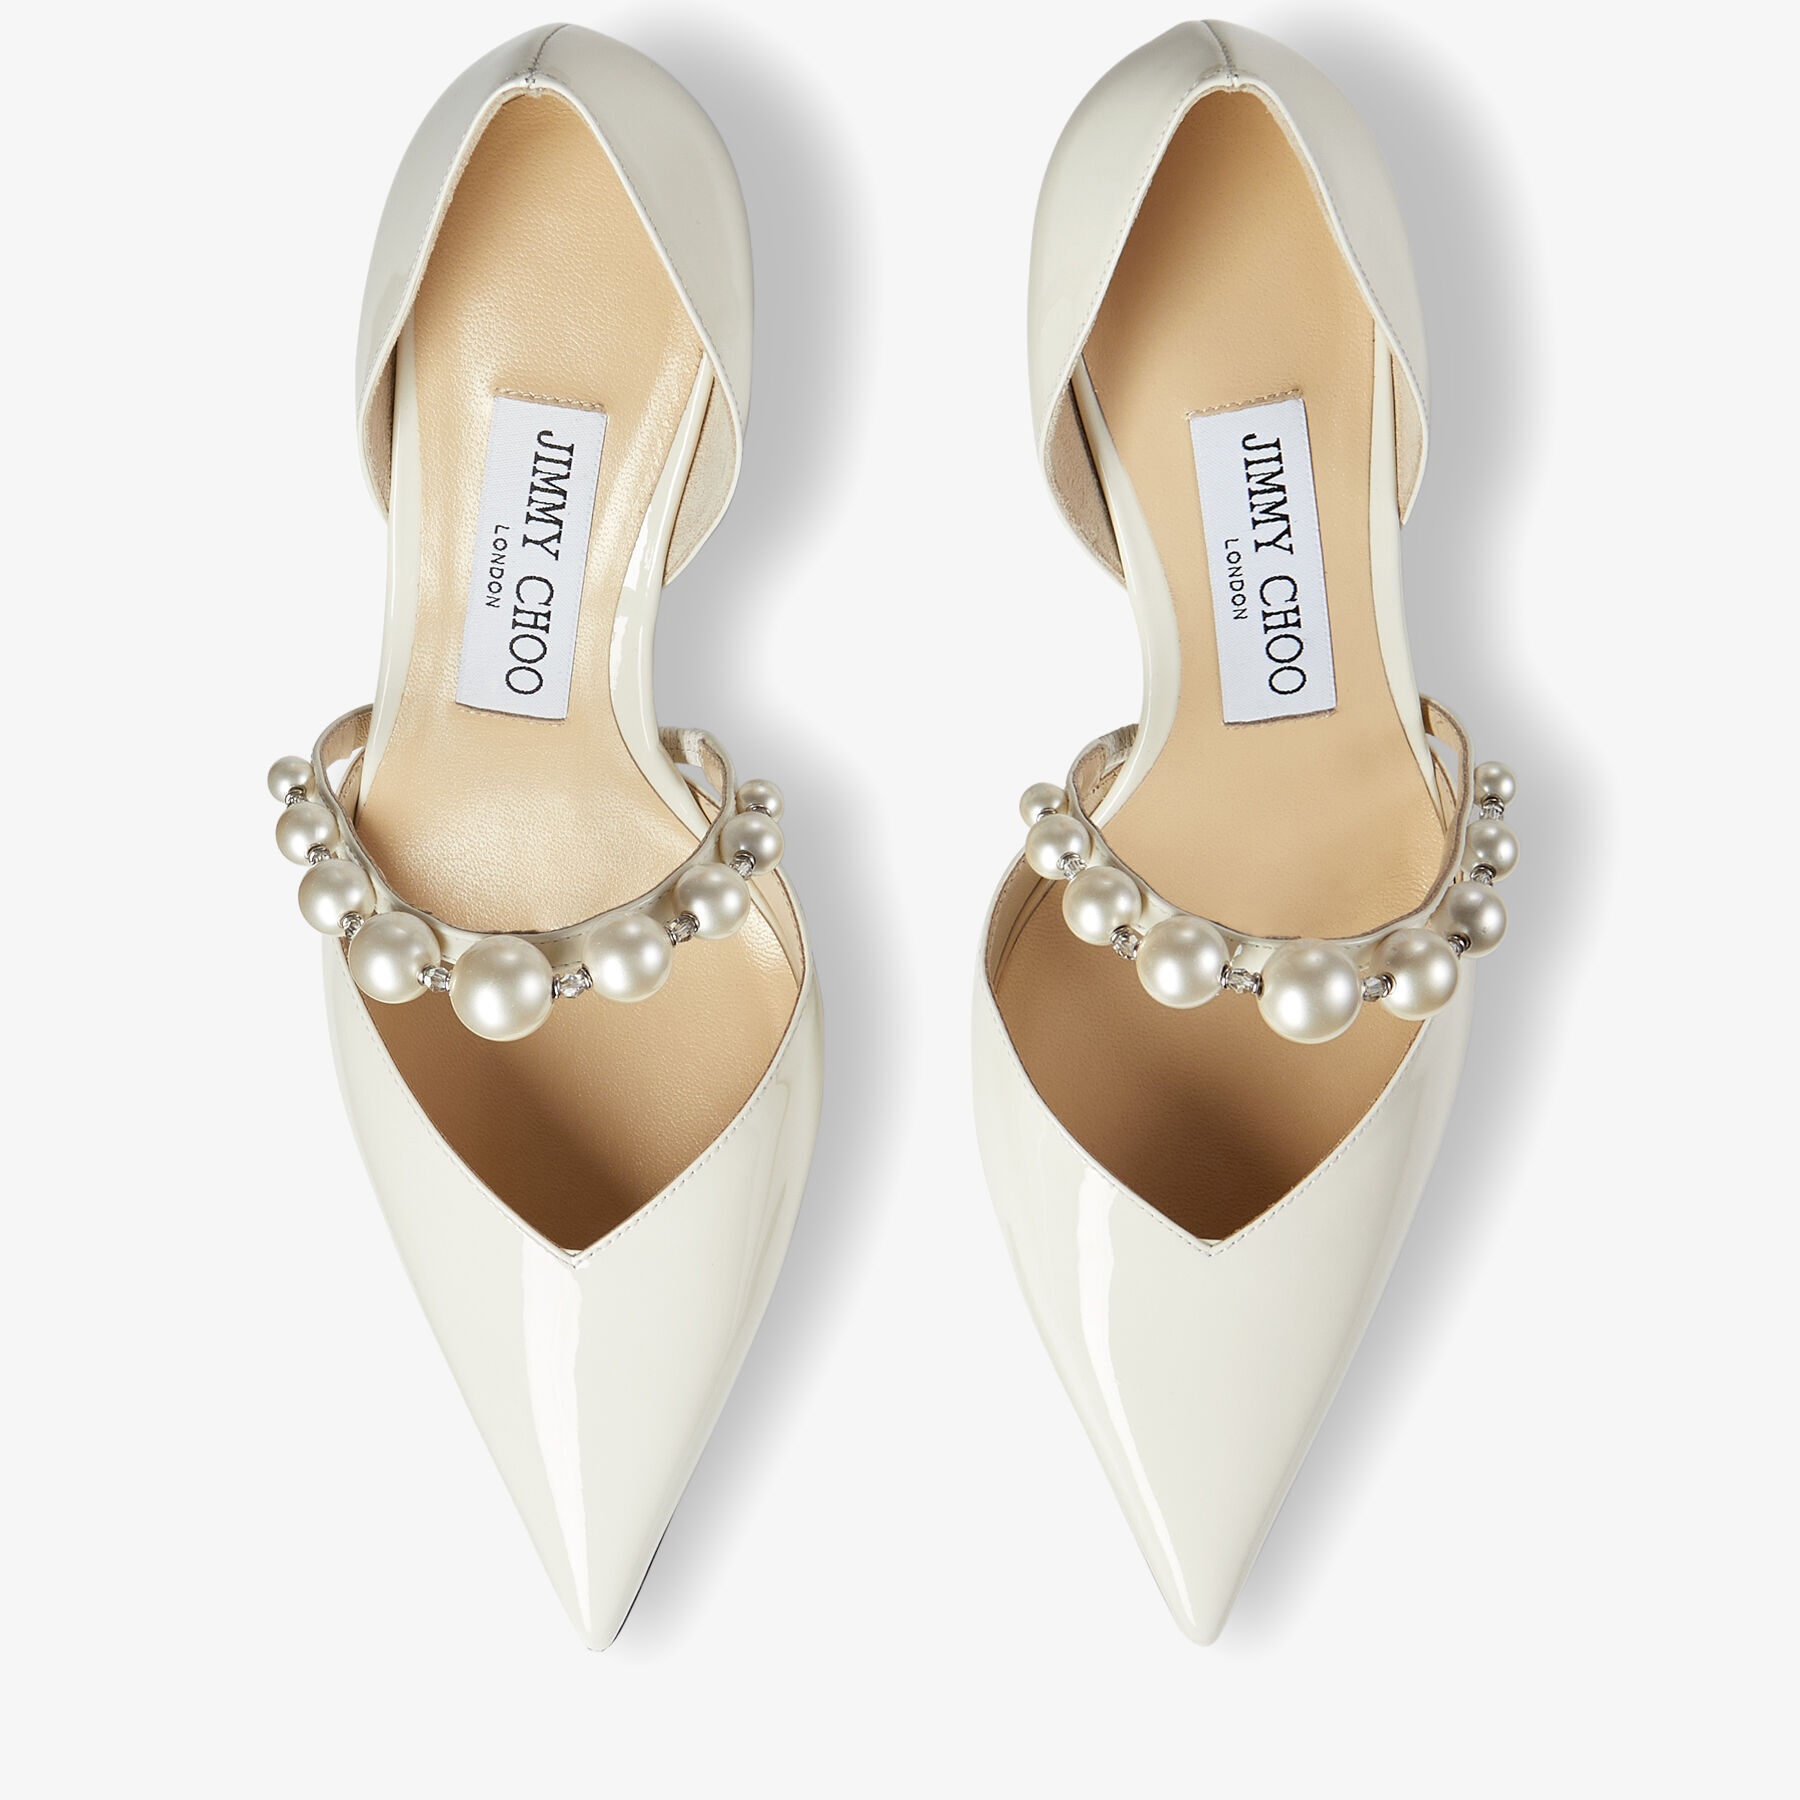 Aurelie 65
Latte Patent Leather Pointed Pumps with Pearl Embellishment - 5